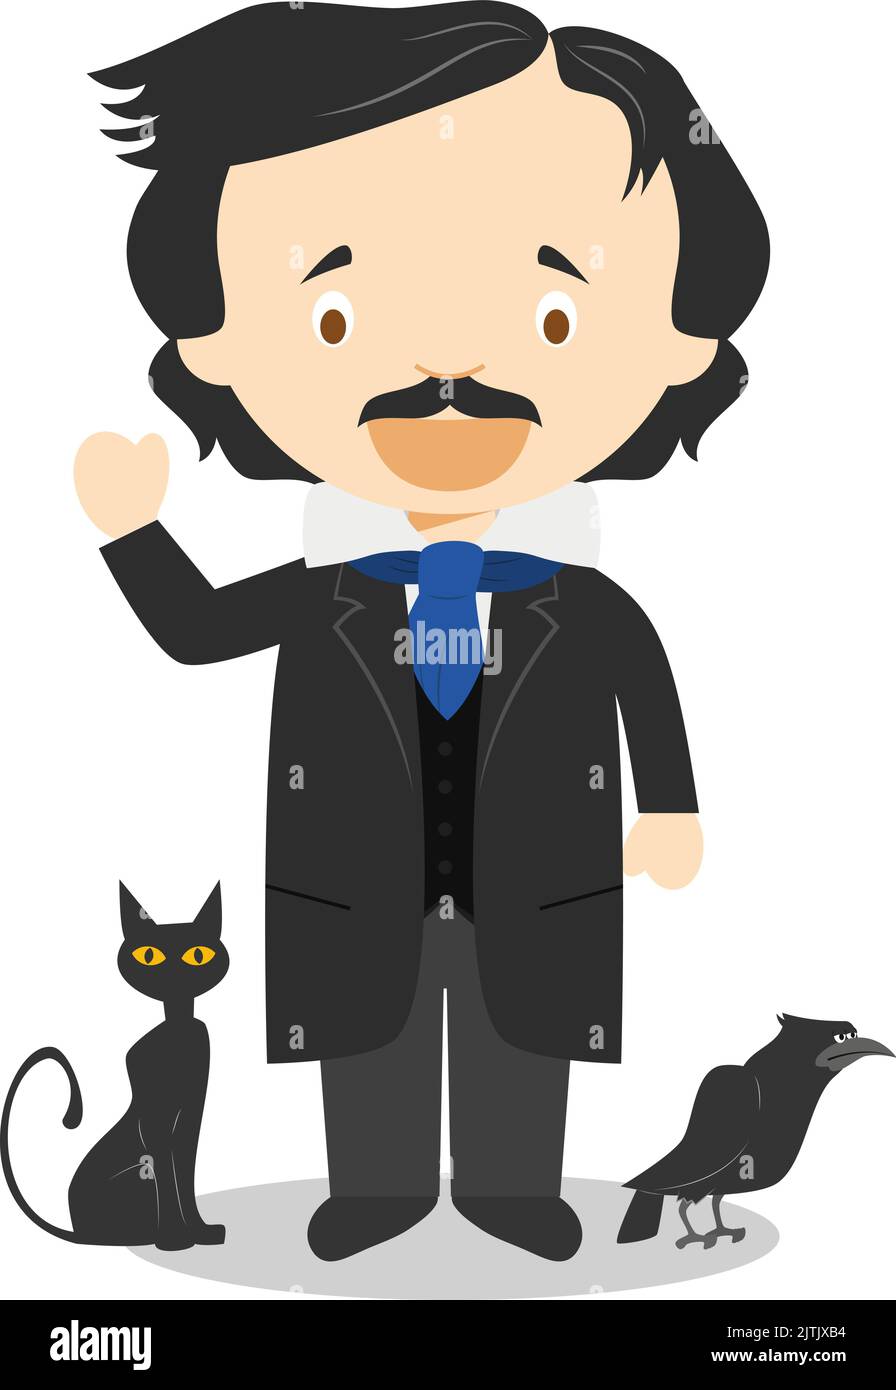 Edgar allan poe story Cut Out Stock Images & Pictures - Alamy